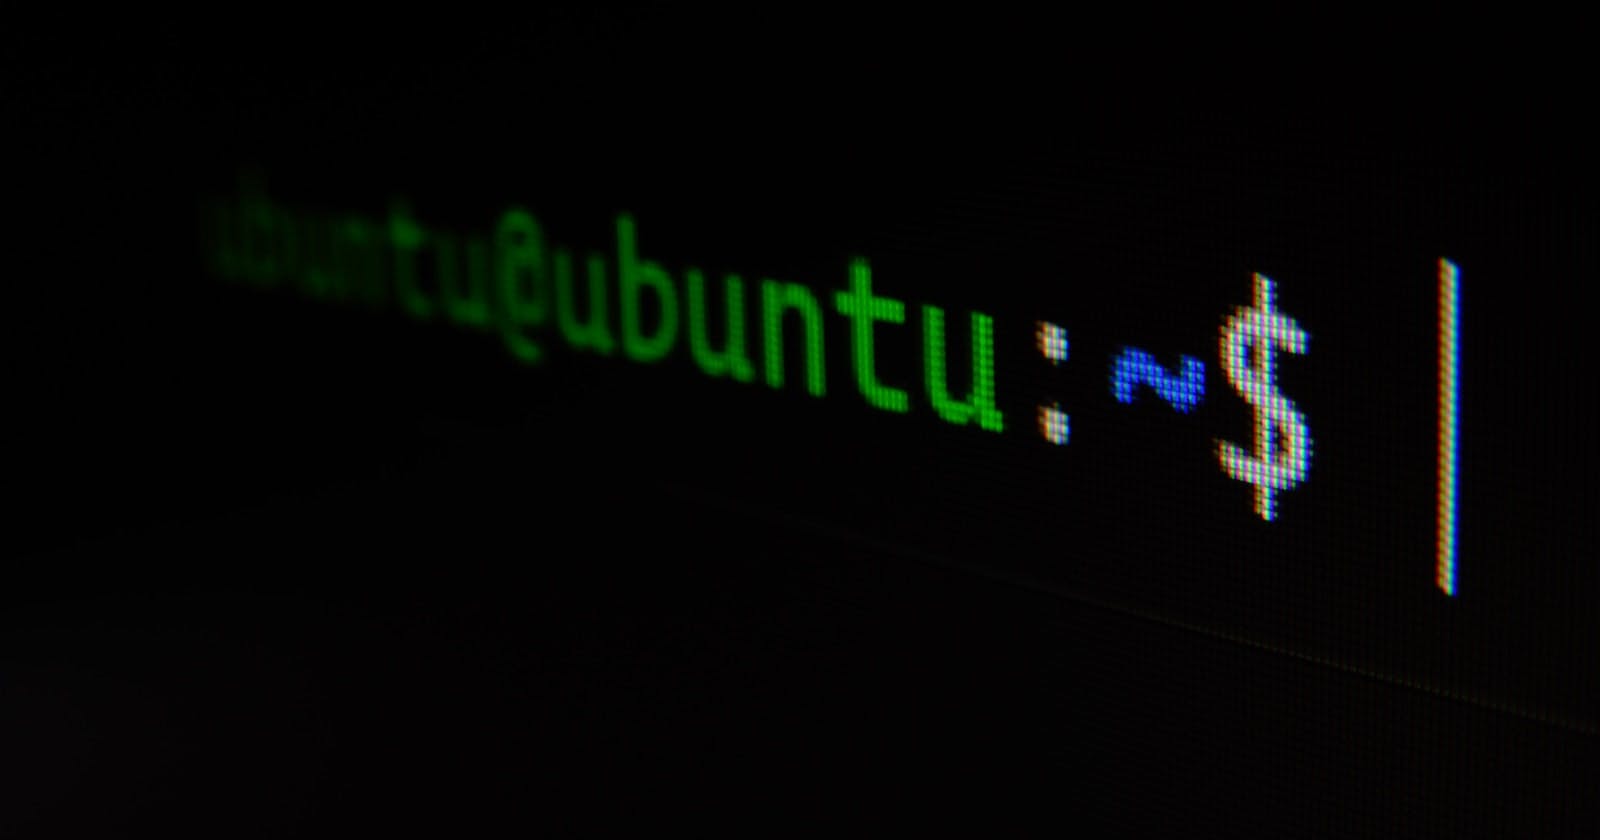 10 basic Linux commands you need to get started.